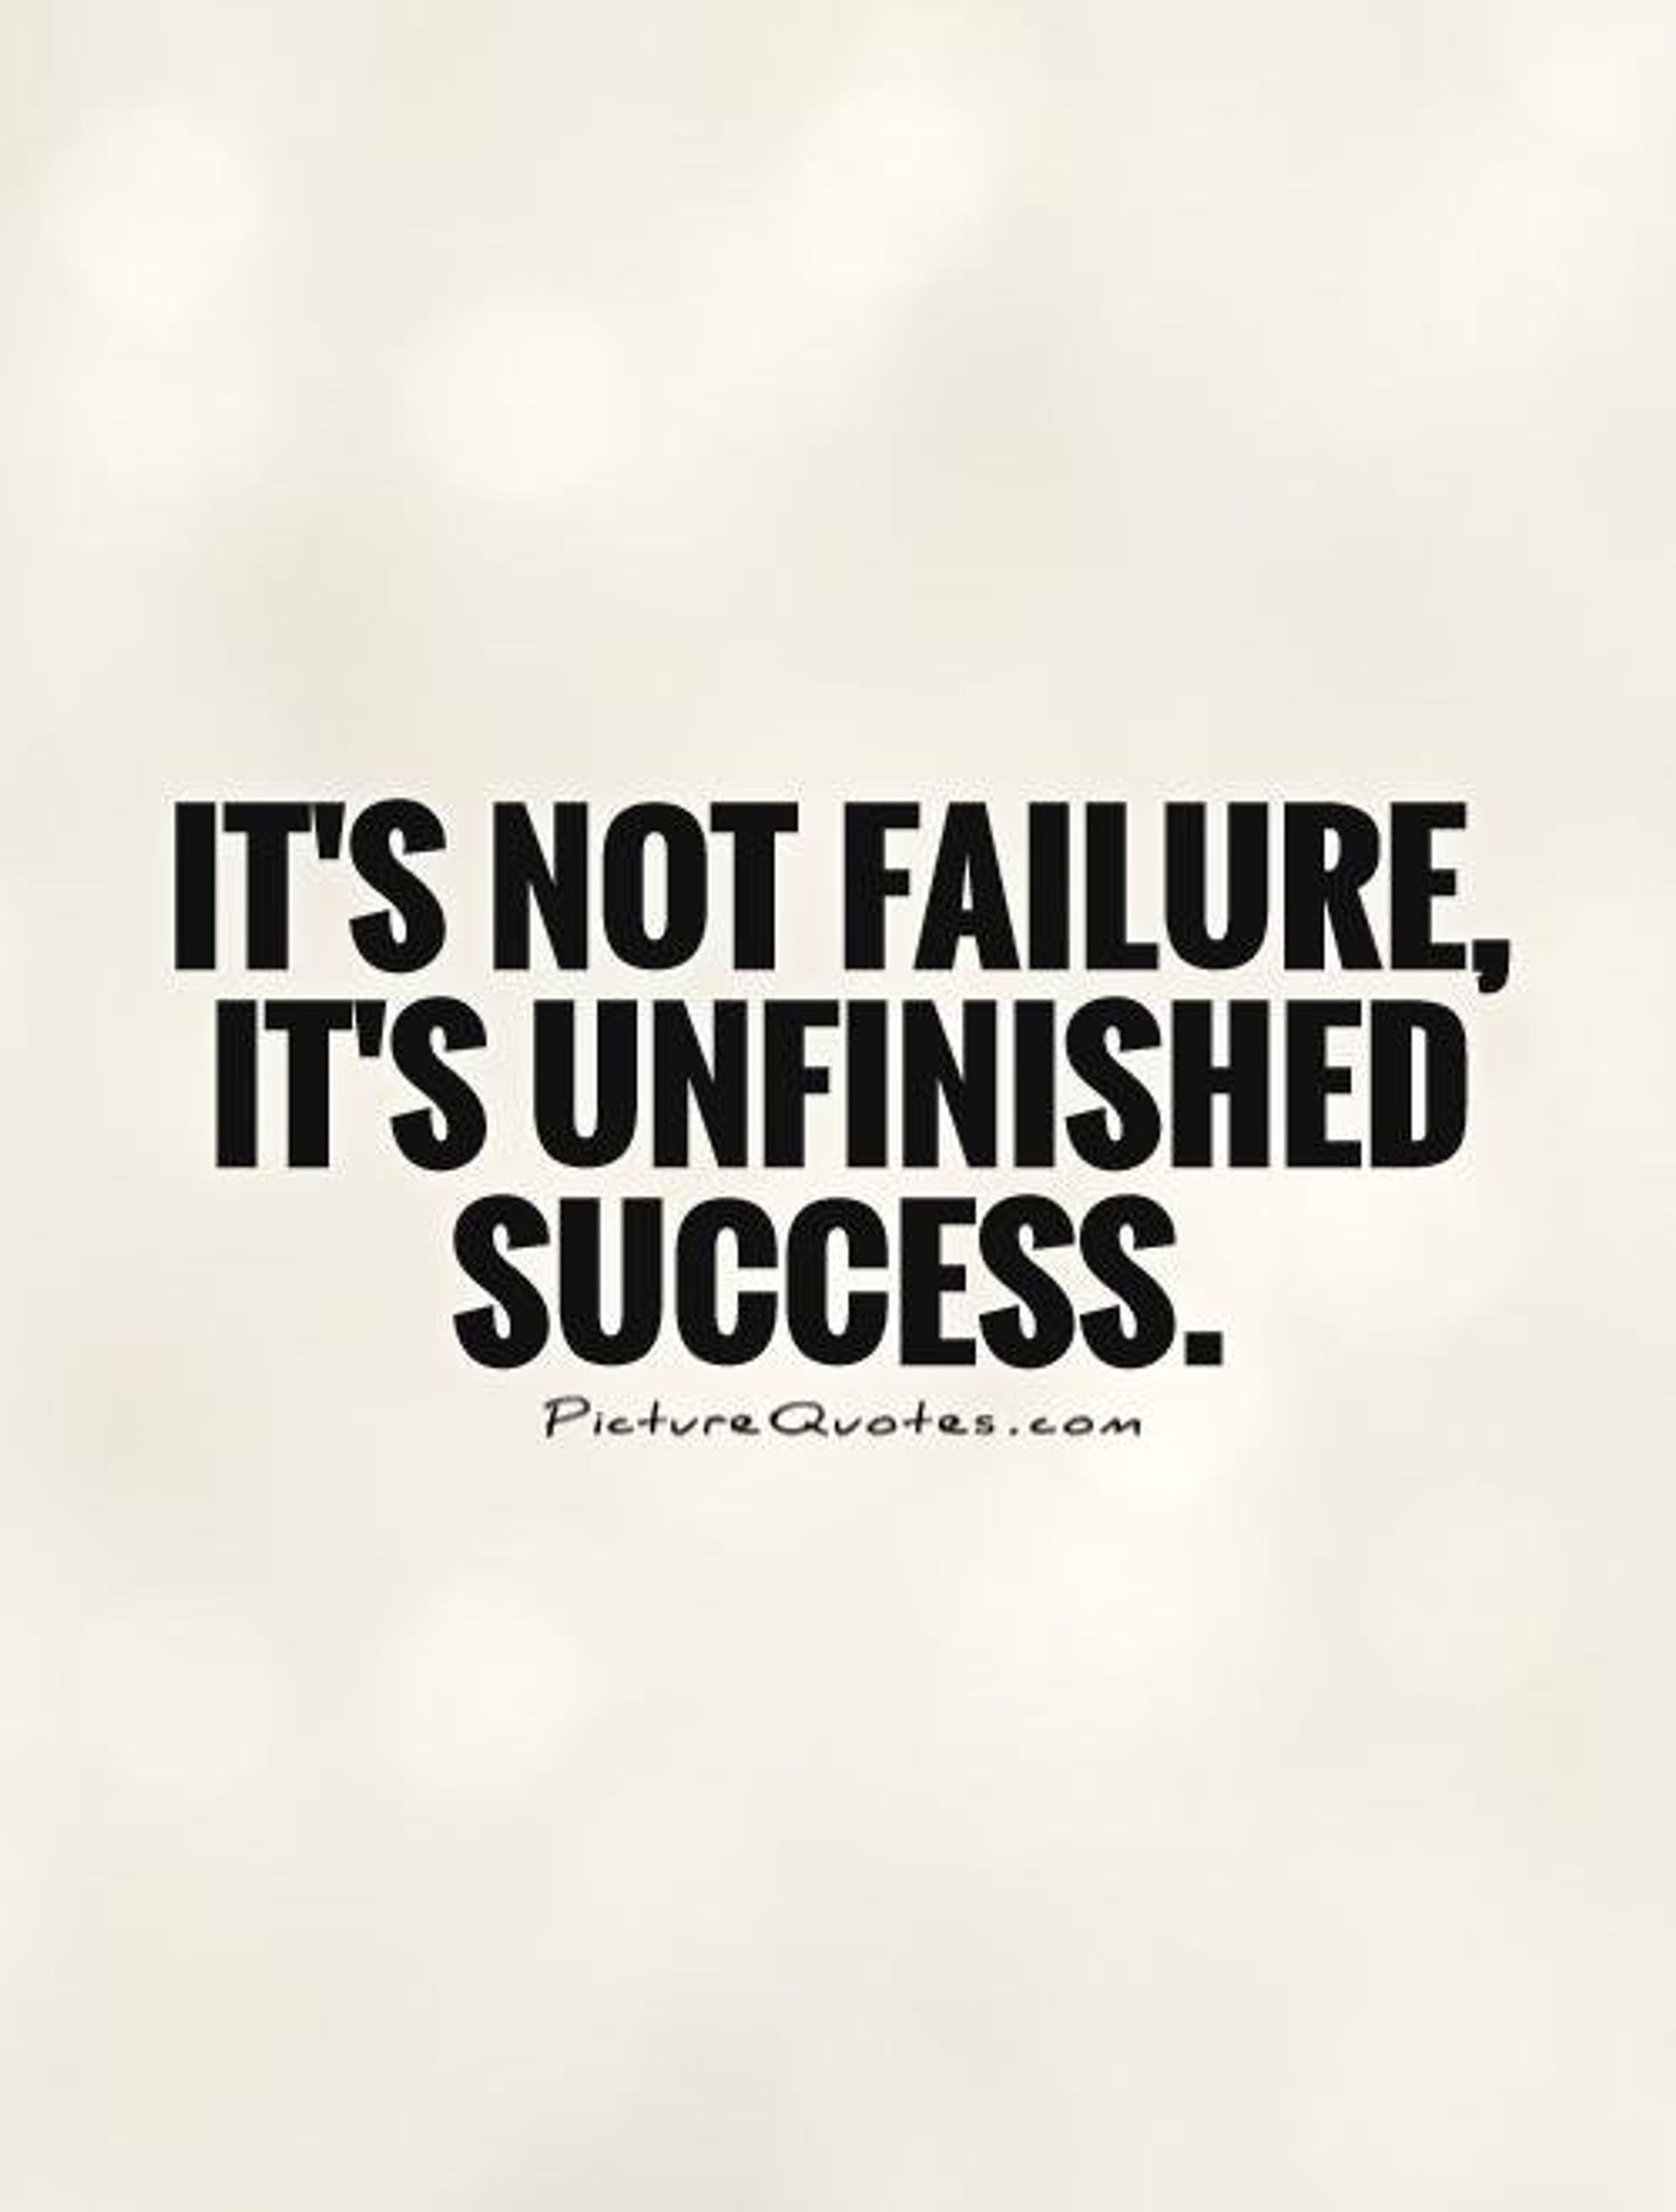 Its-not-failure-its-unfinished-success.